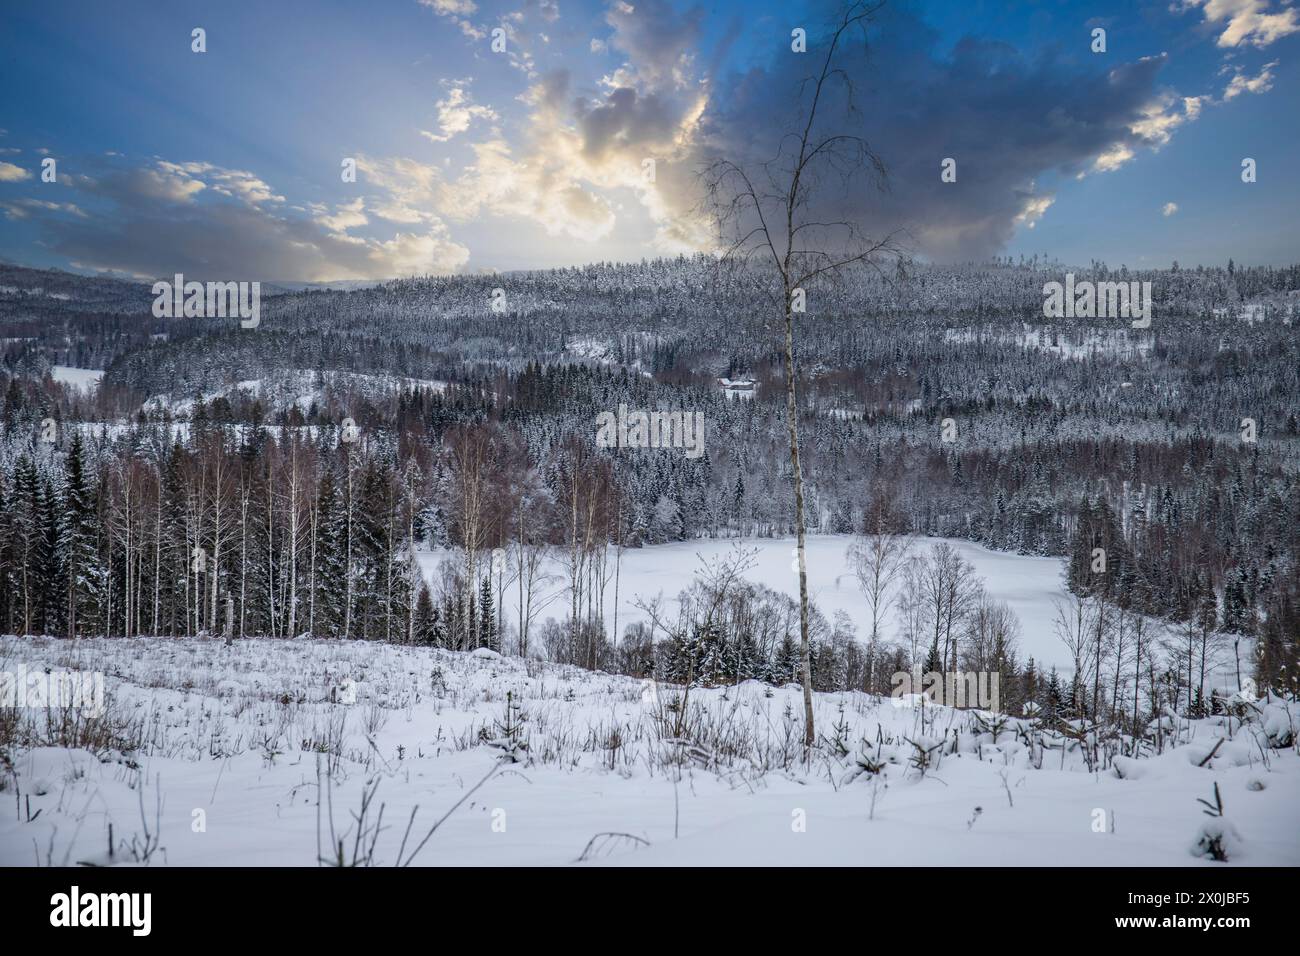 Winter landscape at sunset, forest with snow-covered pine trees in Sweden Stock Photo